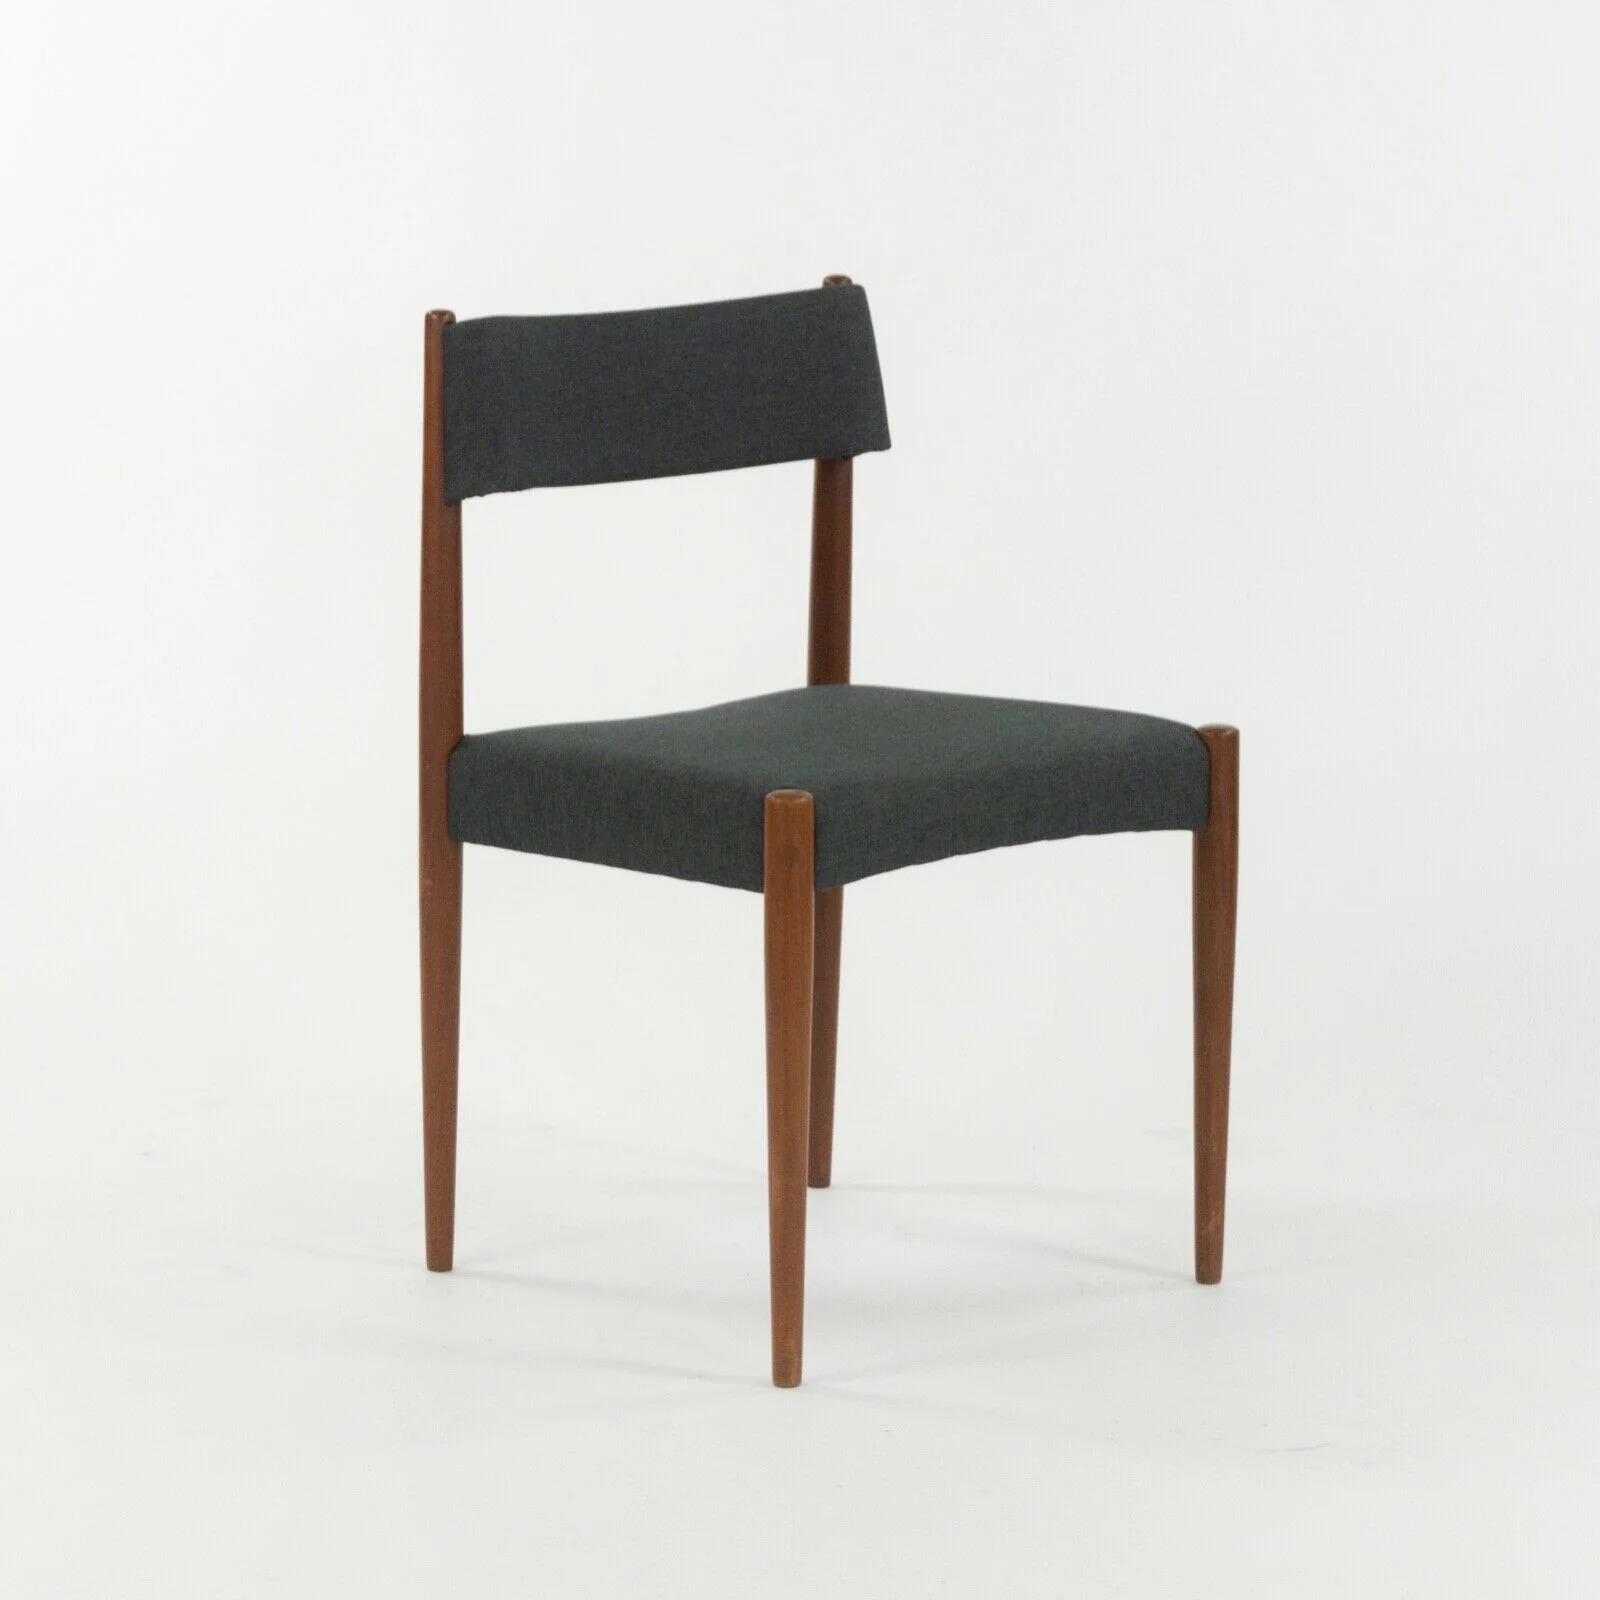 Modern 1960s Knud Faerch Bovenkamp Dining Chairs Netherlands New Upholstery Set of 5 For Sale